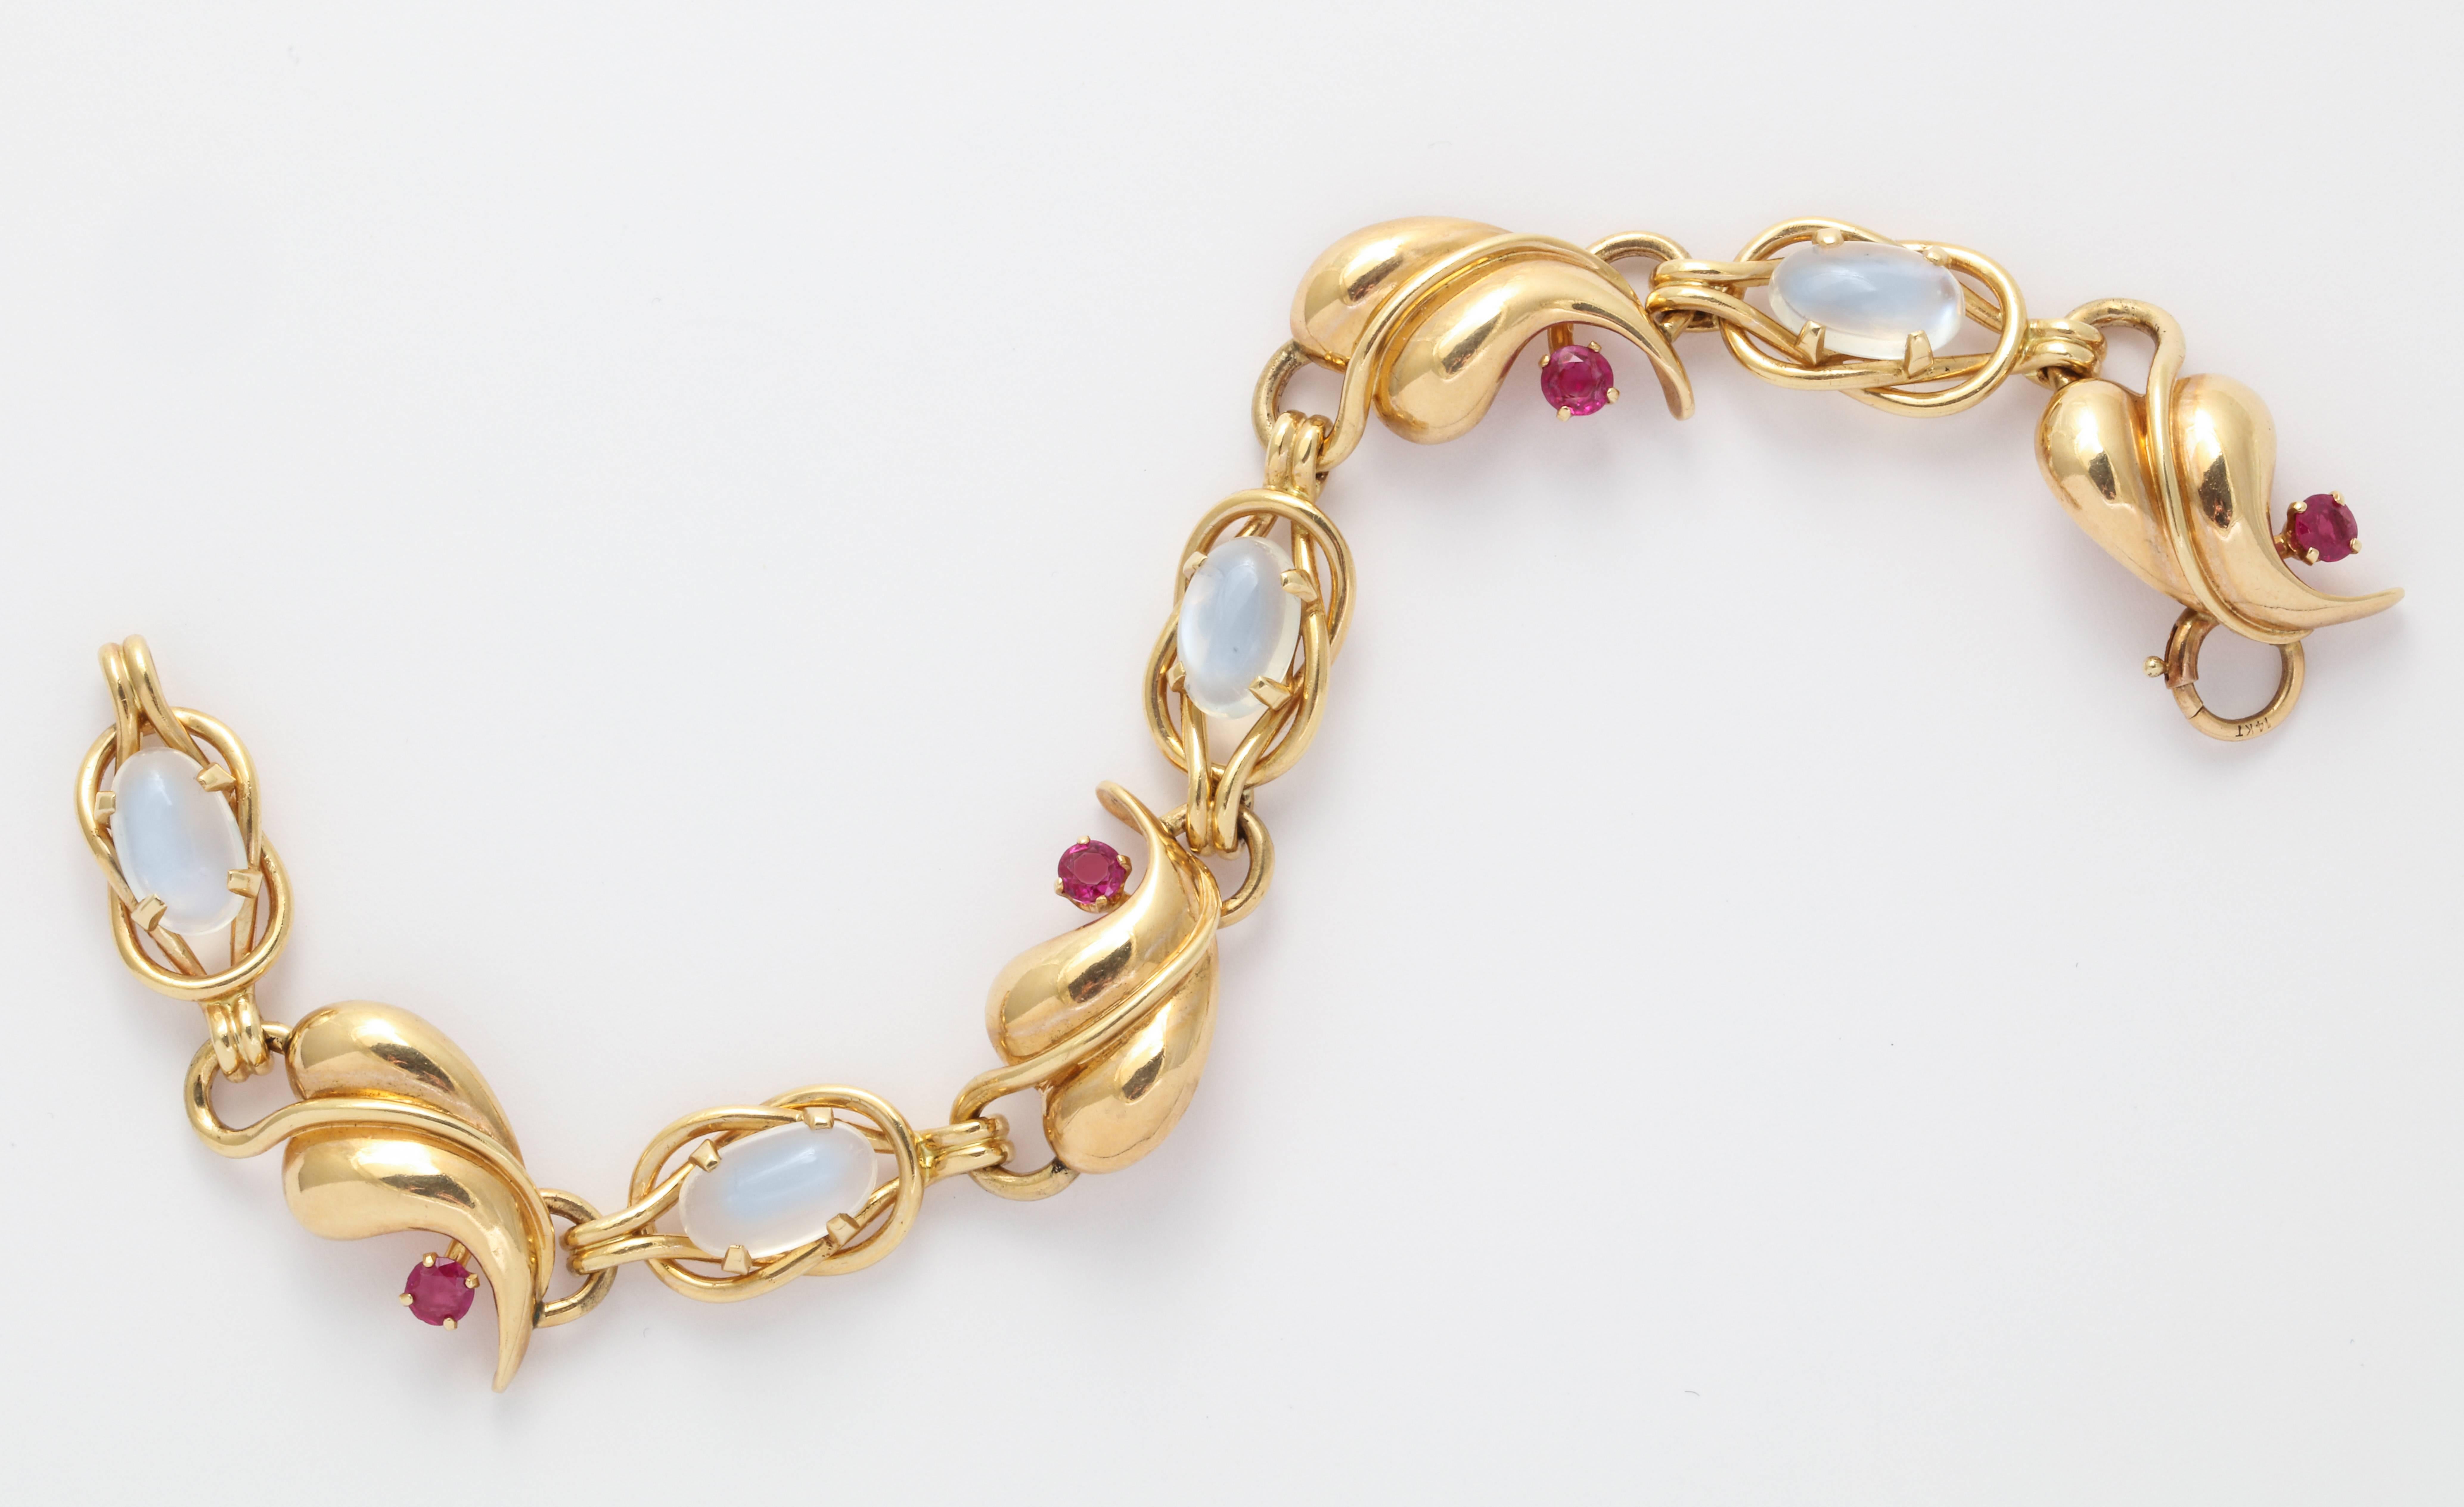 A very pretty 1940s 14K gold link bracelet set with glowing cabochon moonstones and natural rubies. 17.4 grams. 1/2 inch wide x 7 1/4 inches long.